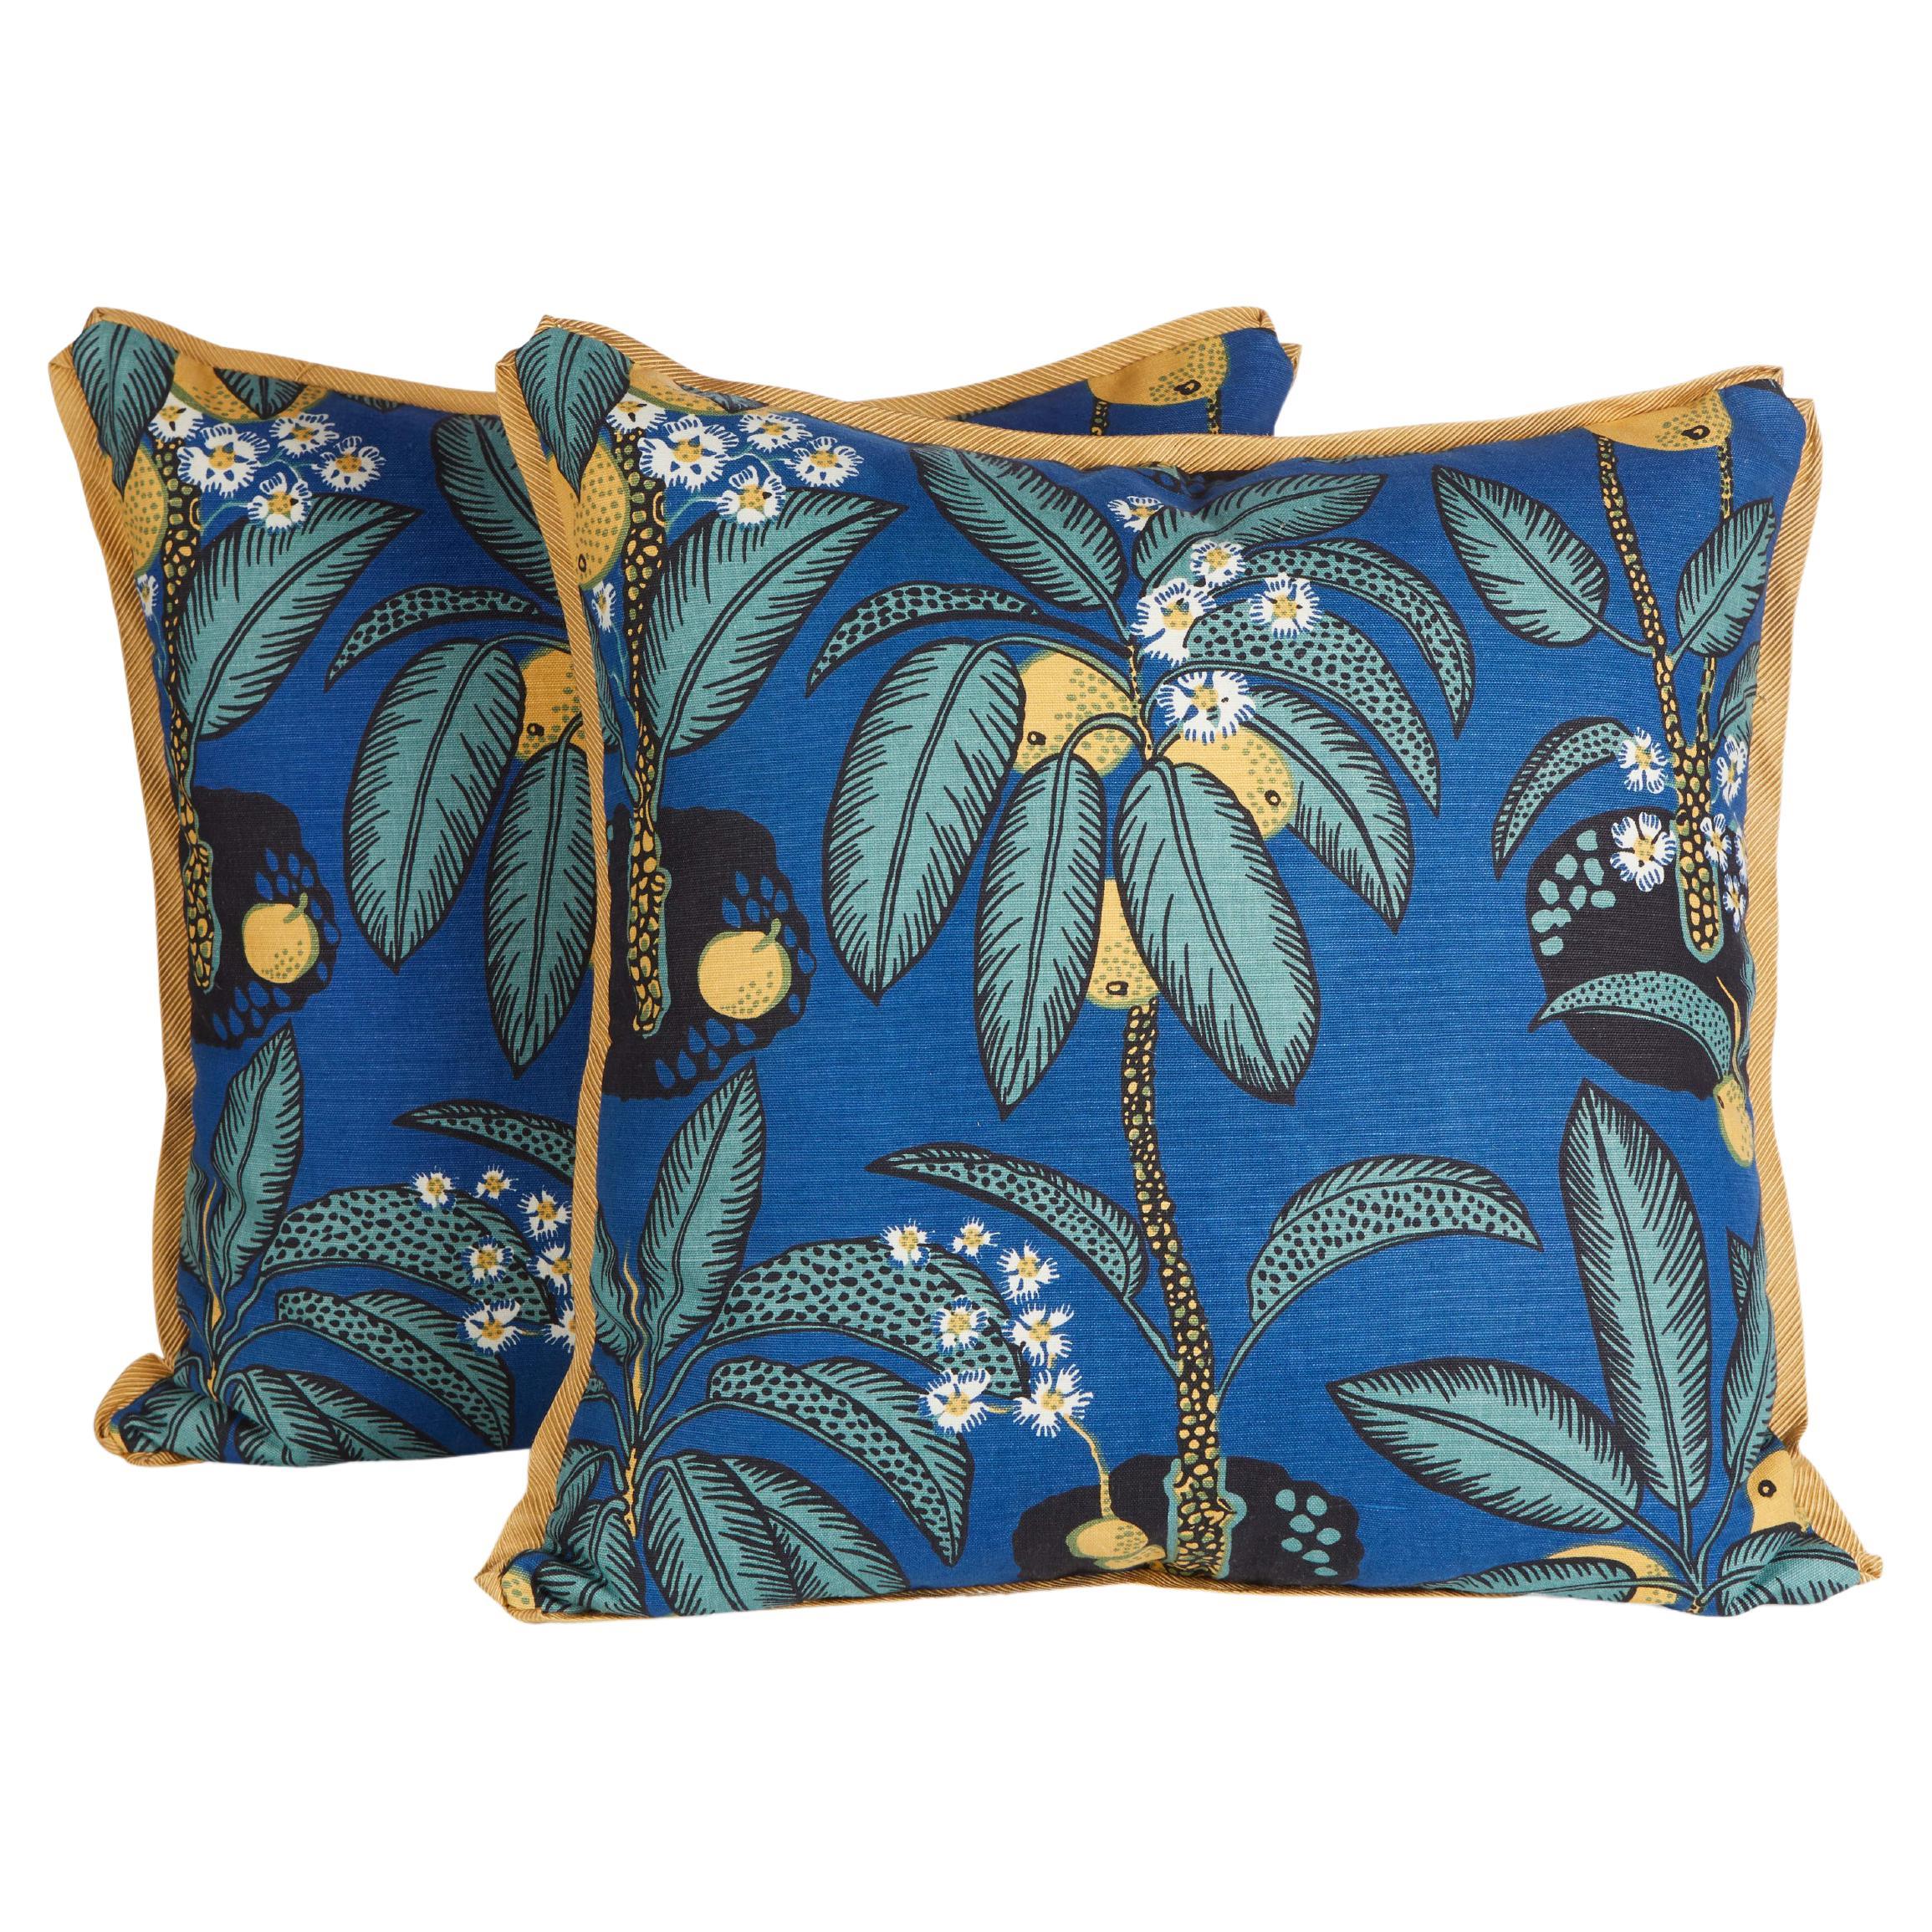 Pair of Rectangular Josef Frank Cushions in the Notturno Pattern For Sale